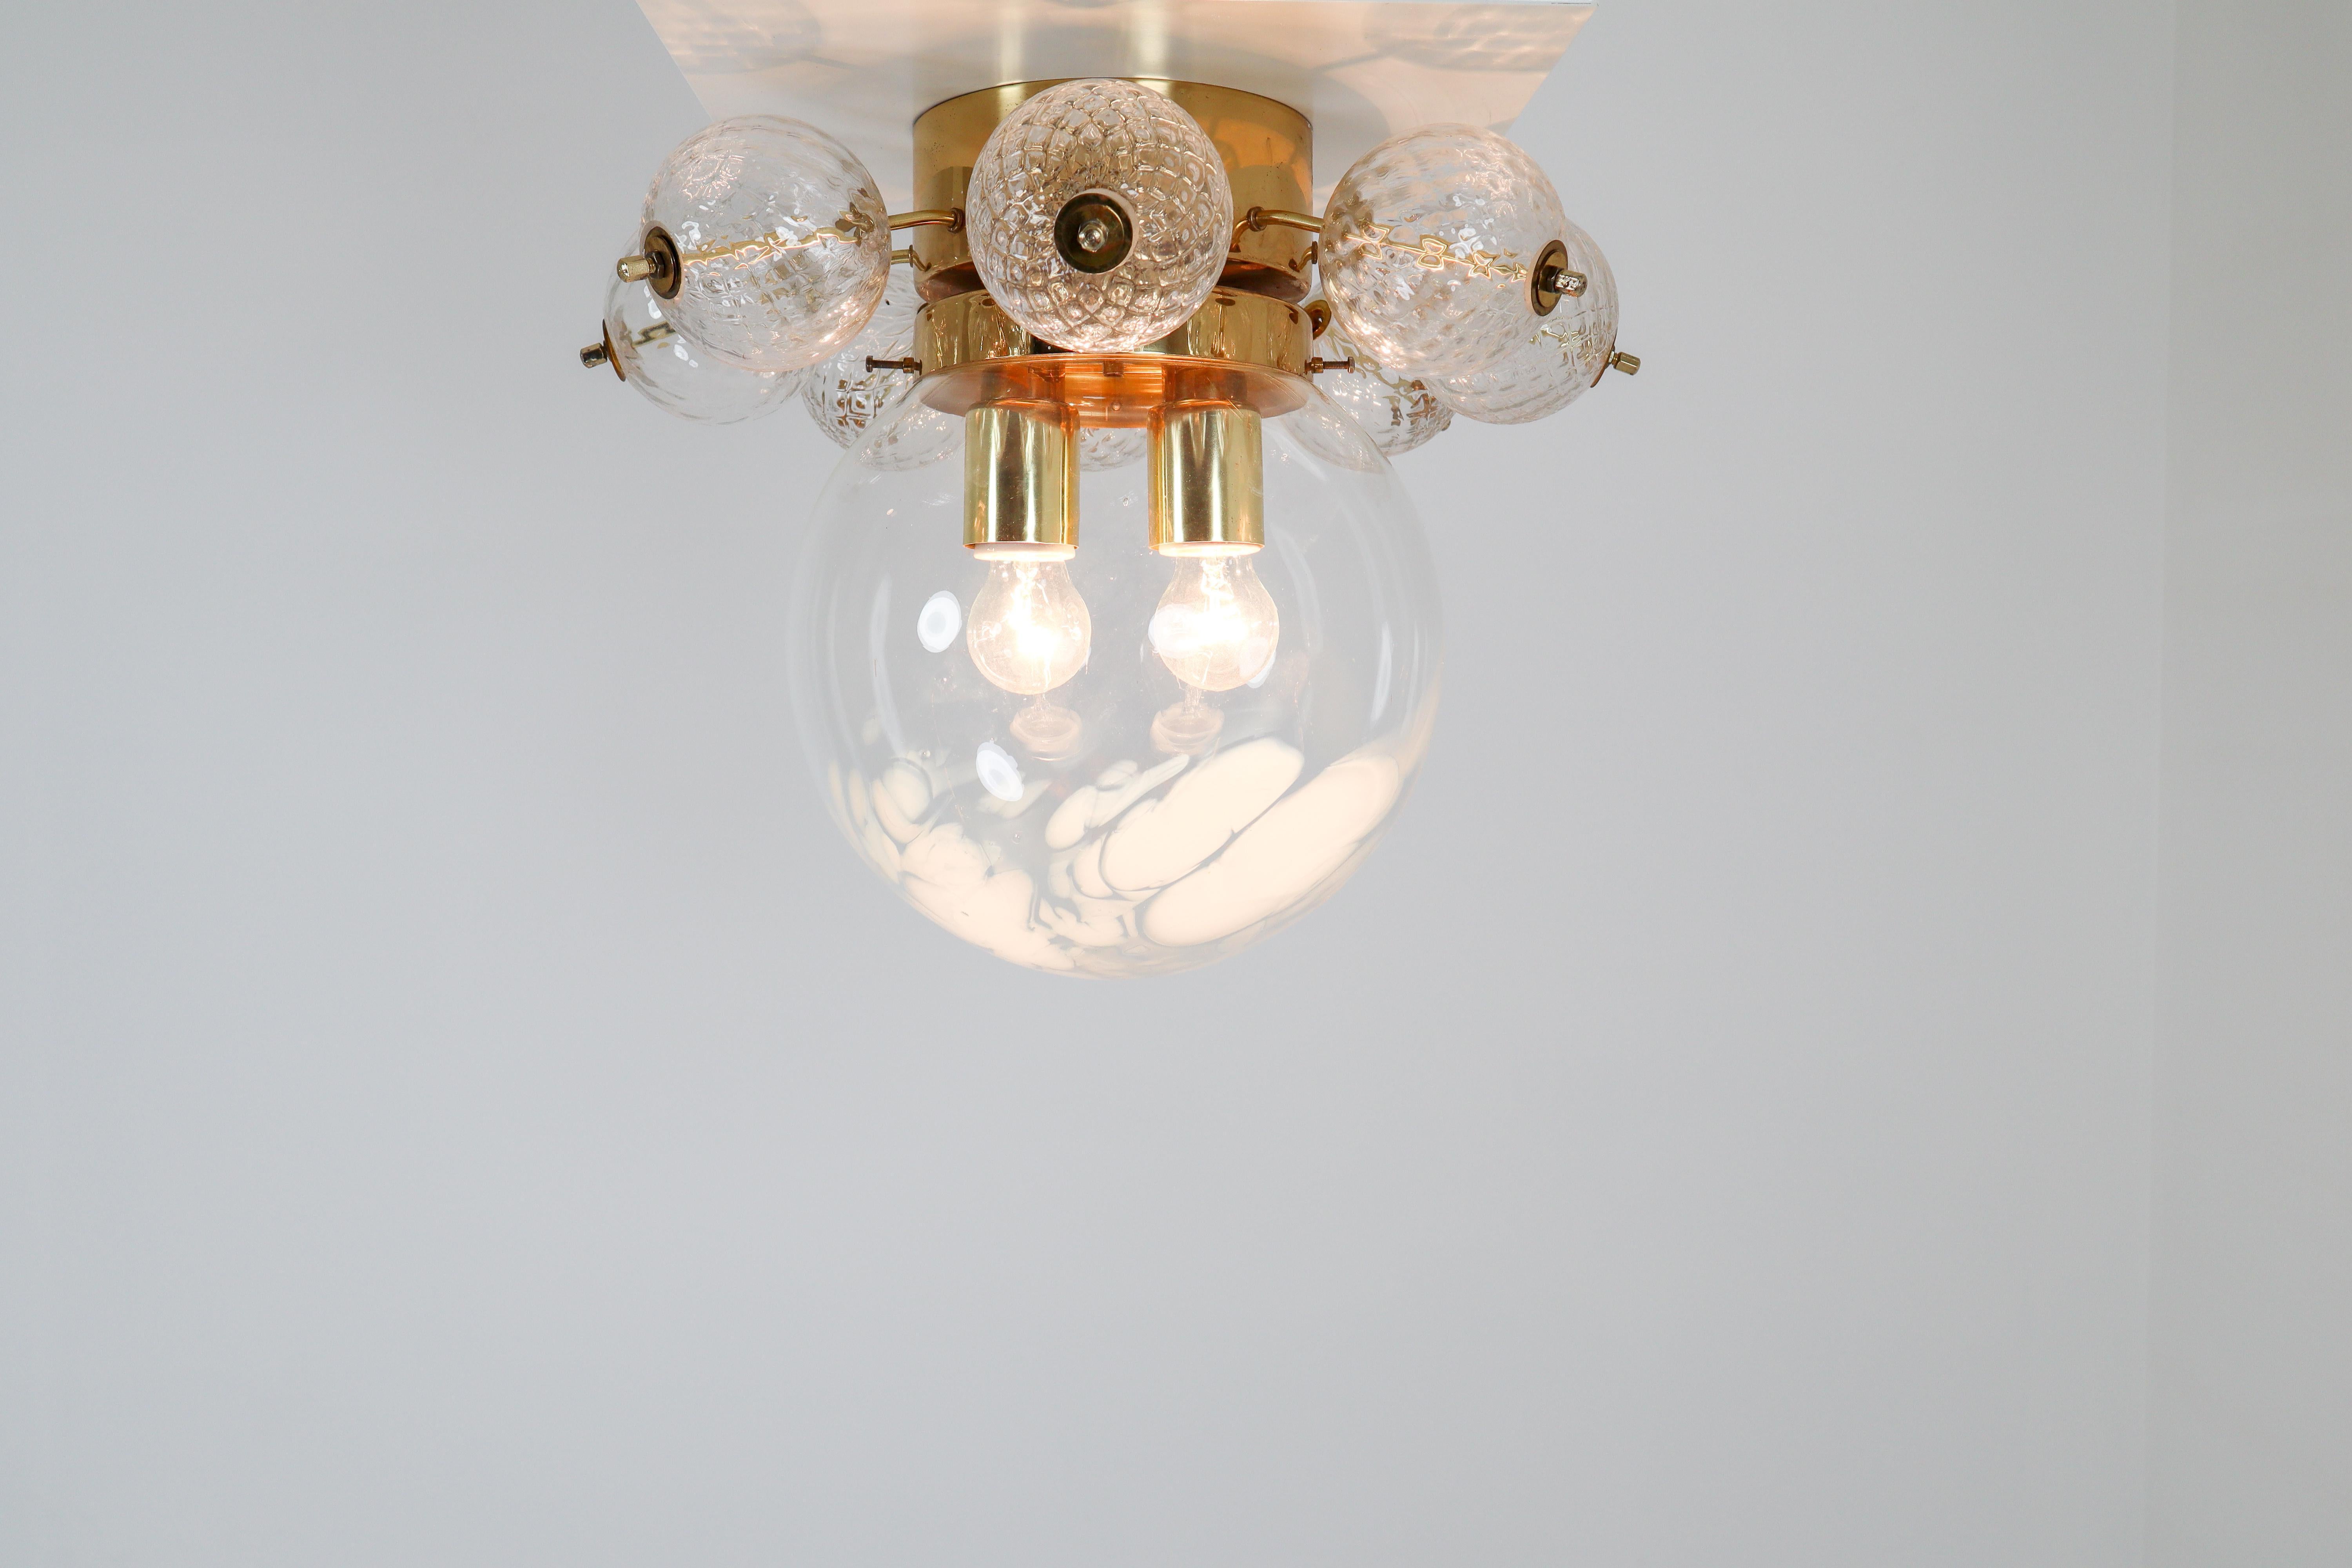 20th Century Large Midcentury Brass Ceiling Lamp-Chandelier with Handblown Art-Glass , 1960s For Sale